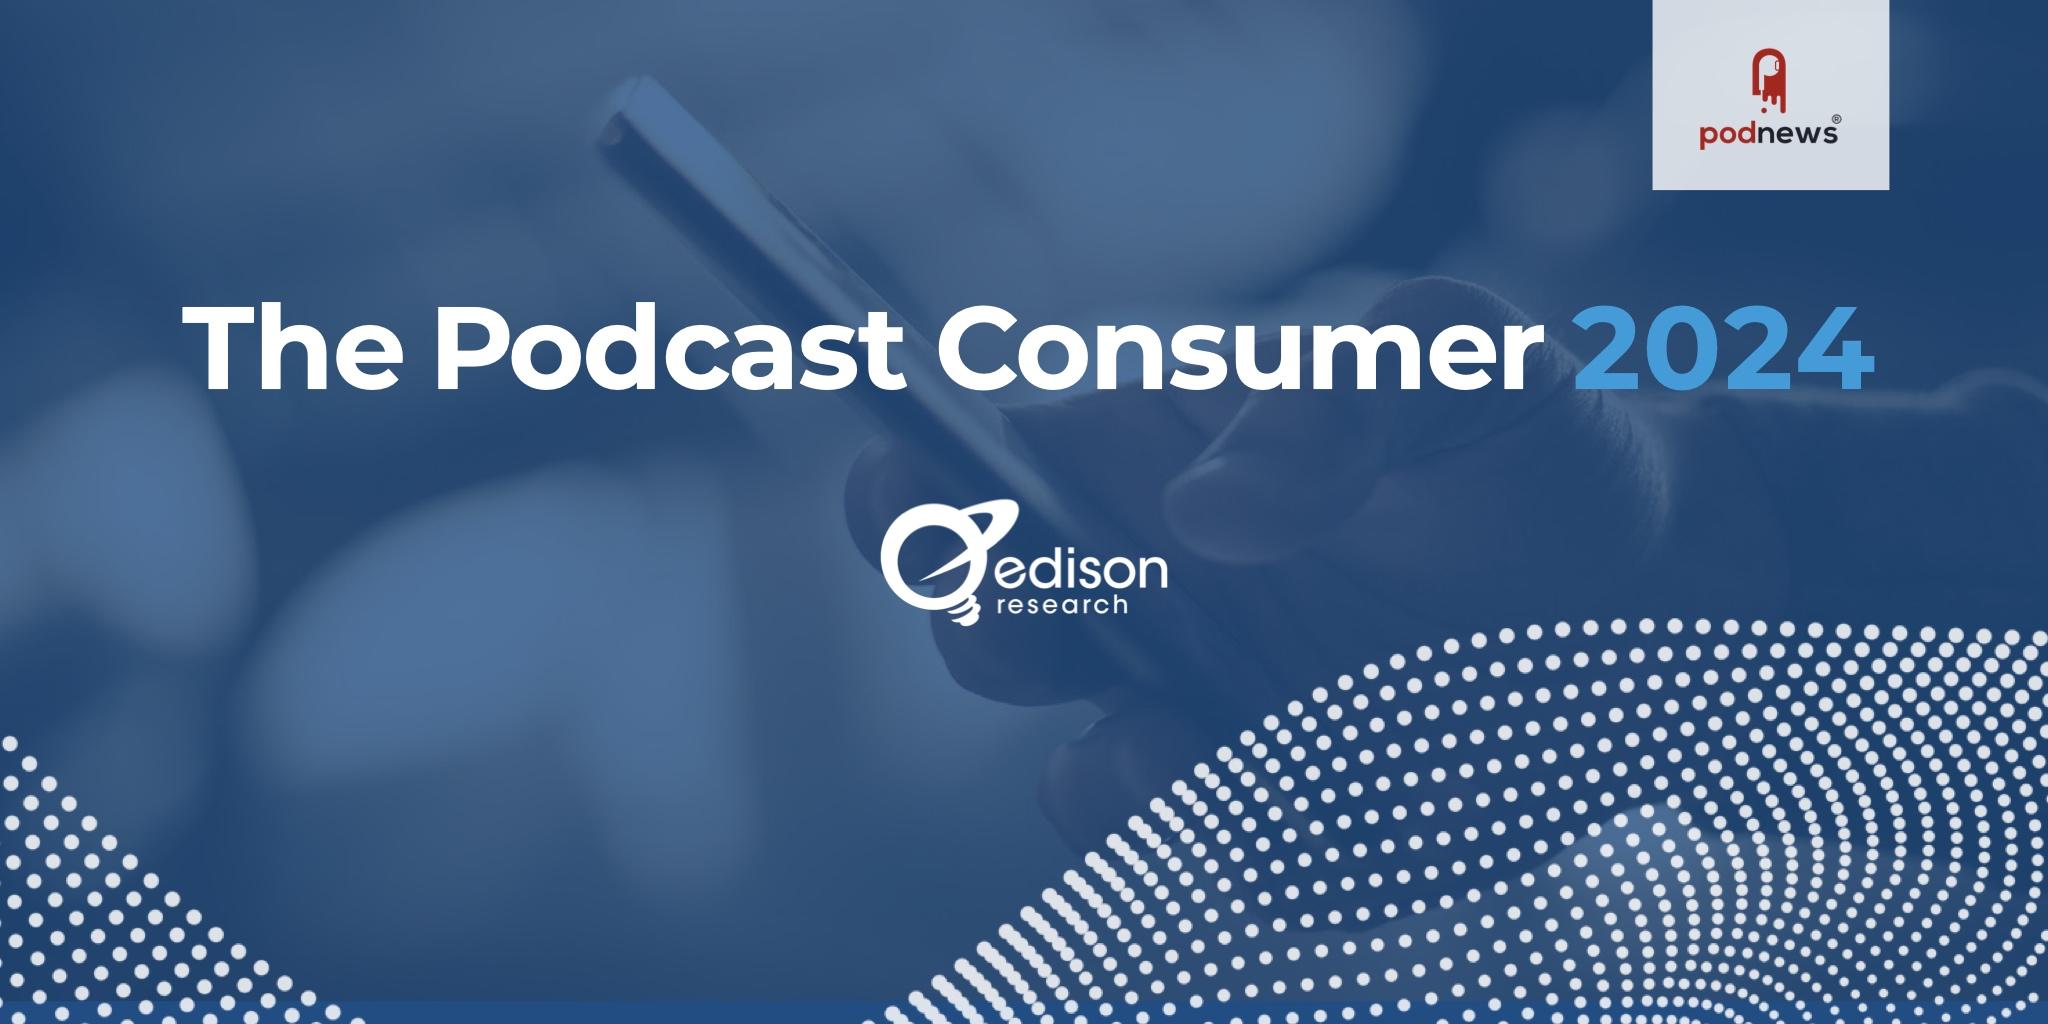 Podcasts have established themselves as a mainstream media platform, attracting an ever-growing and highly engaged audience, as highlighted in The Pod